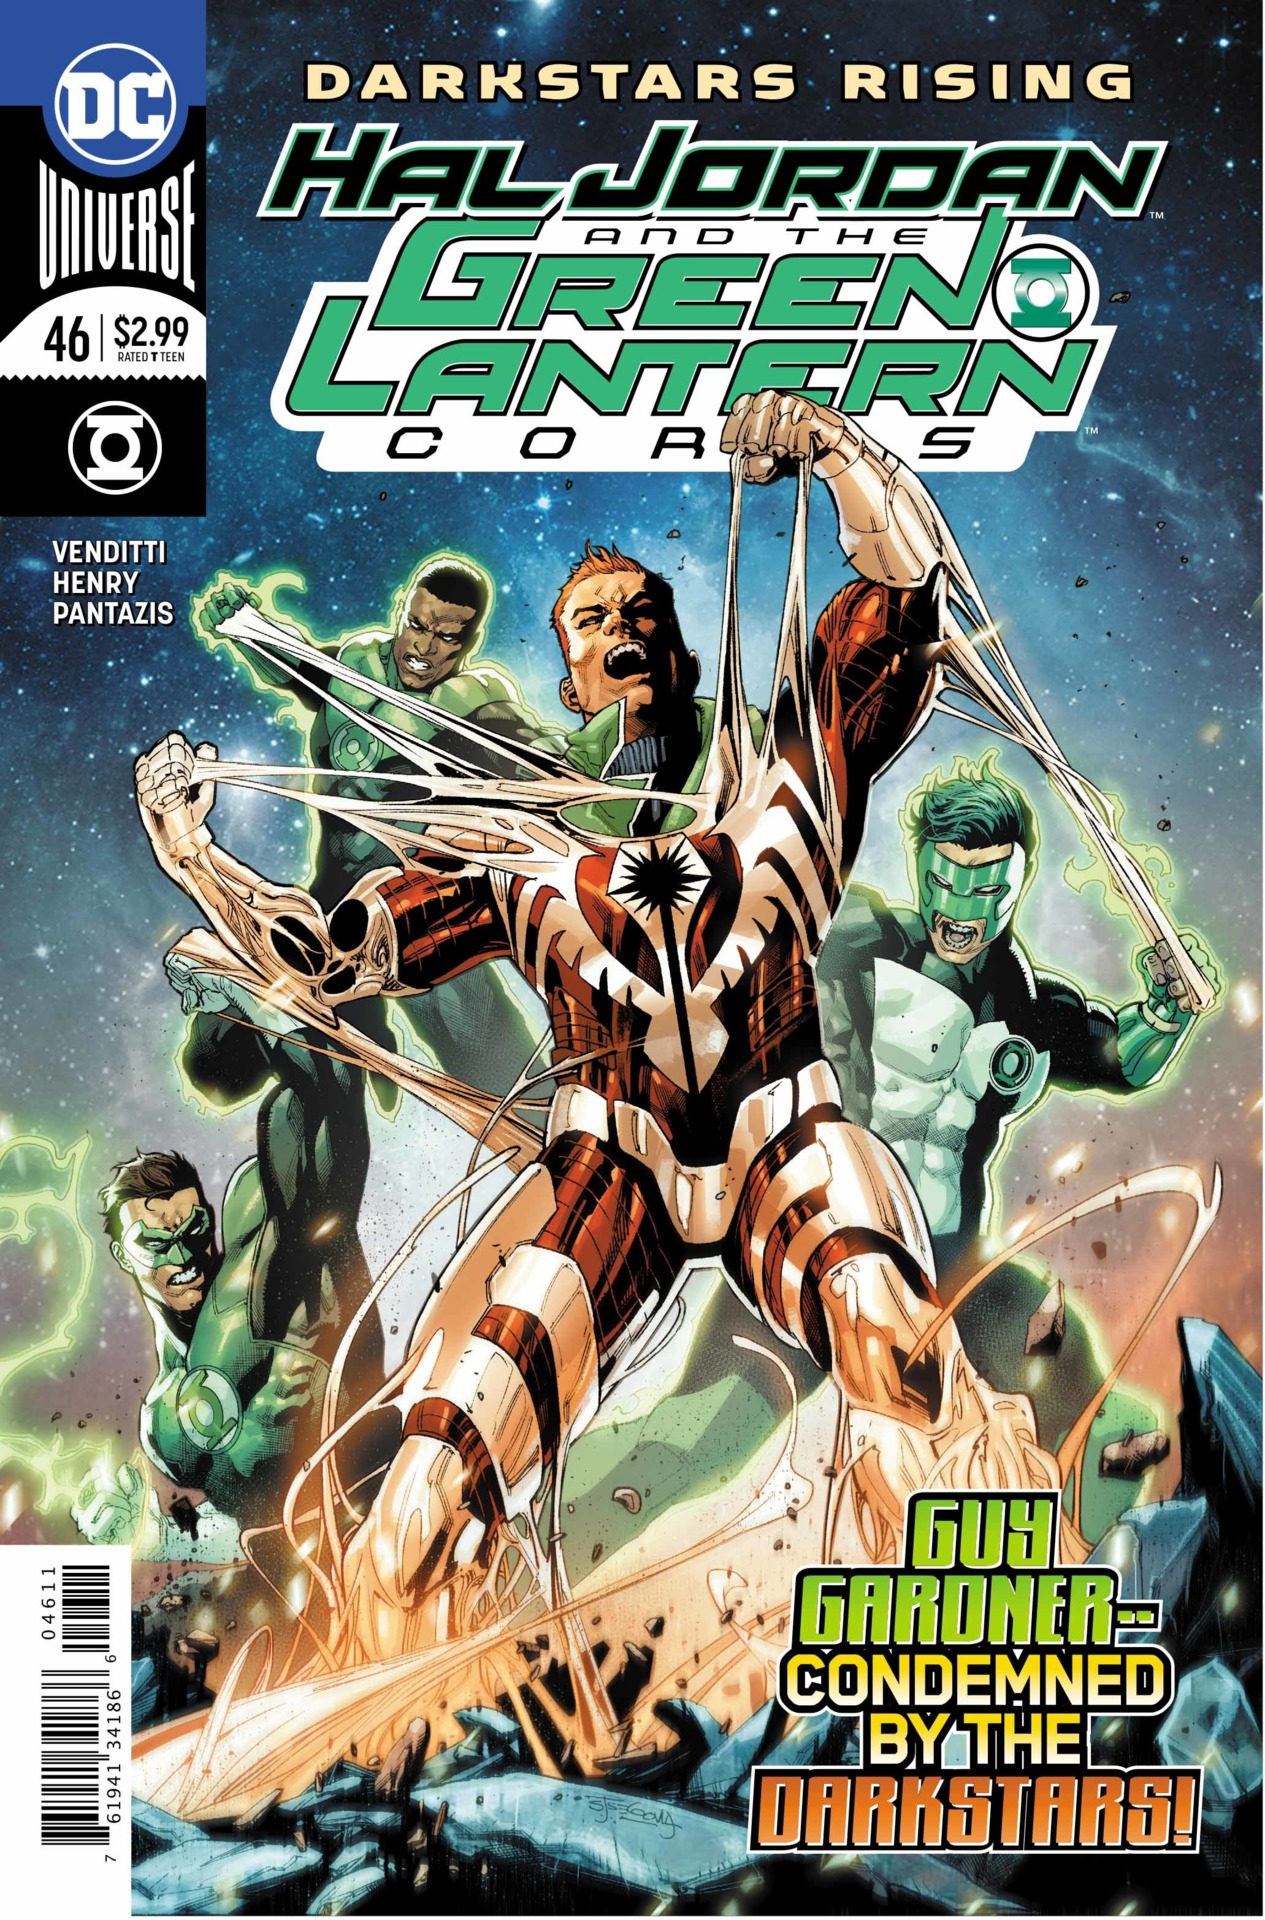 DC’s Green Lantern Corps Series Has Some Real “Daddy Issues”